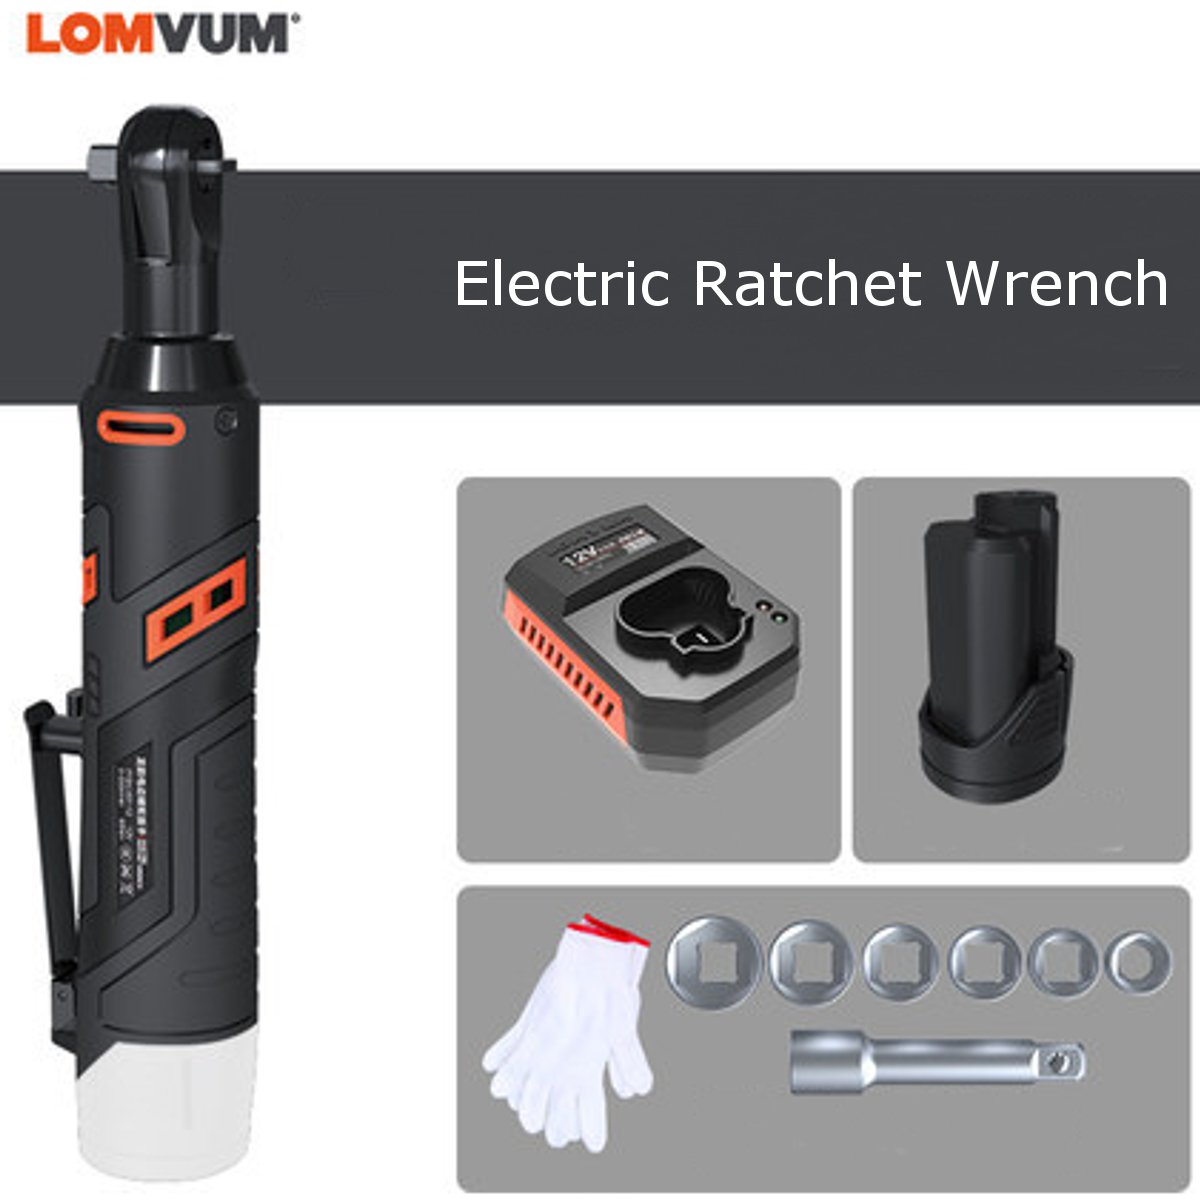 Power-Cordless-Ratchet-Wrench-Toolkit-38Inch-60NM-12V-Electric-Ratchet-Wrench-Right-Angle-With-Batte-1529794-5